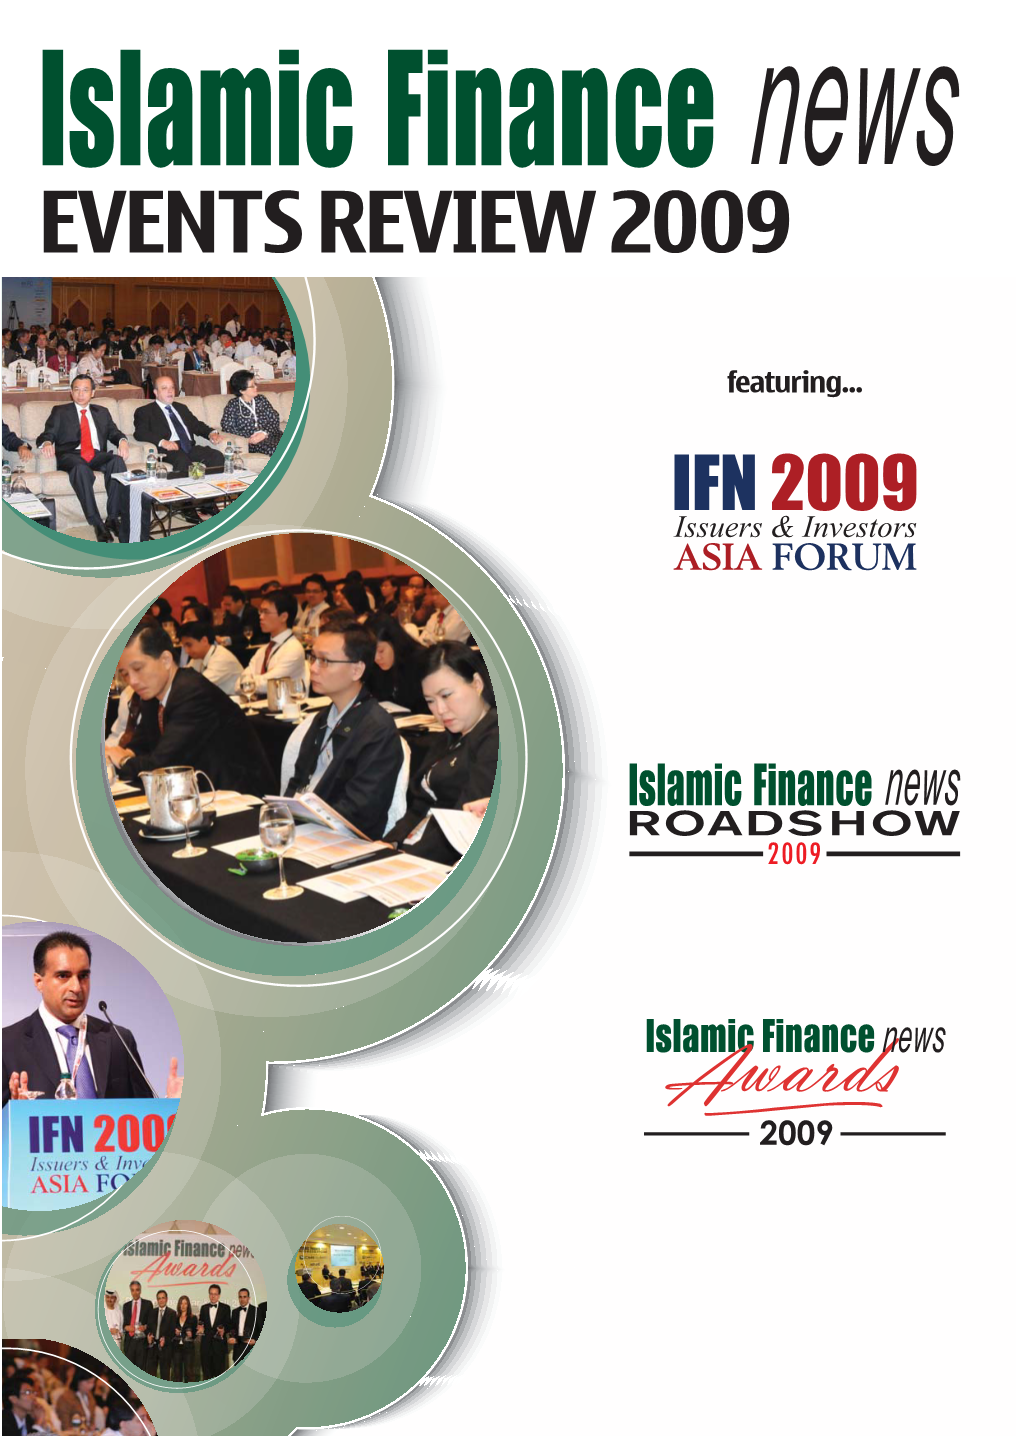 Events Review 2009